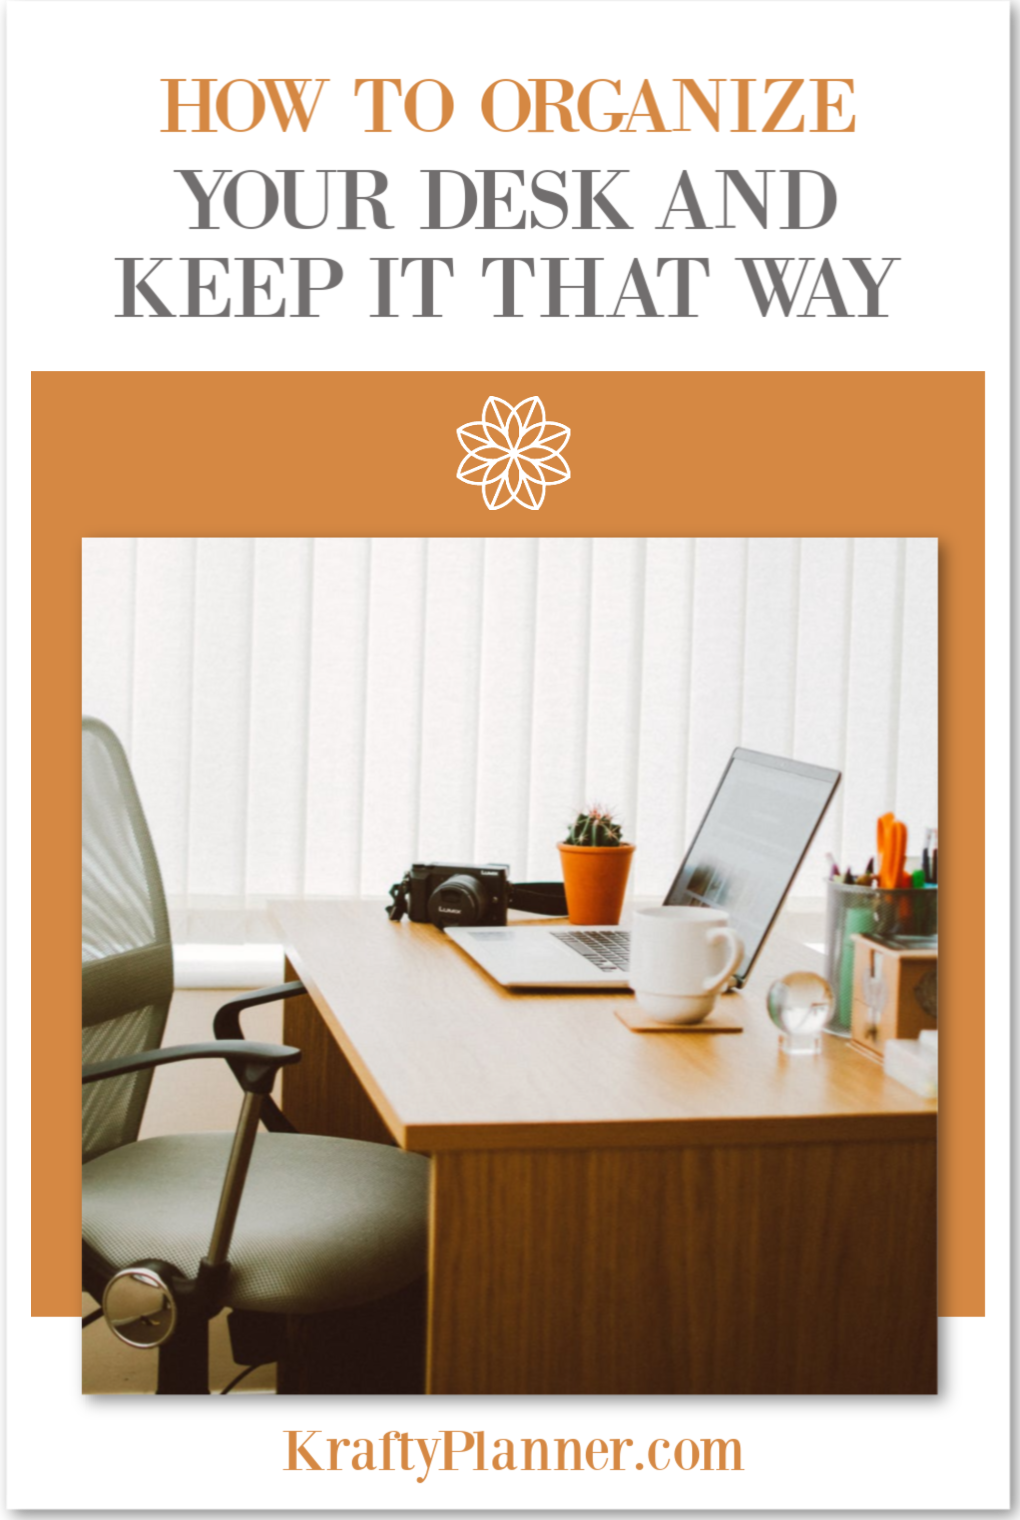 How to Organize Your Desk and Keep it That Way PIN 3.png